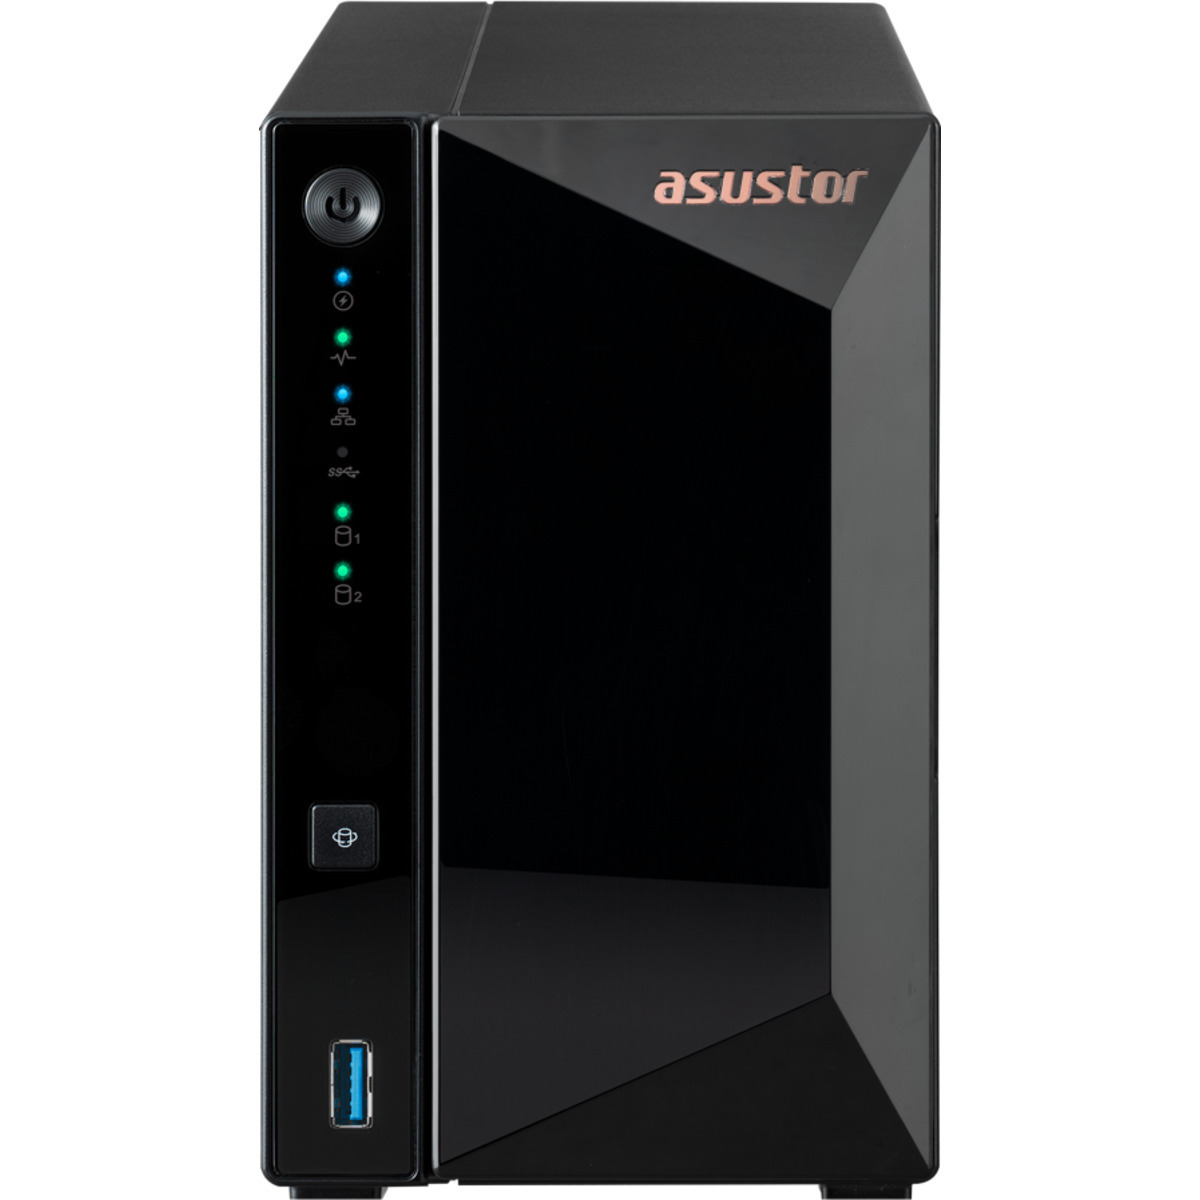 ASUSTOR DRIVESTOR 2 Pro AS3302T 16tb 2-Bay Desktop Personal / Basic Home / Small Office NAS - Network Attached Storage Device 2x8tb Seagate EXOS 7E10 ST8000NM017B 3.5 7200rpm SATA 6Gb/s HDD ENTERPRISE Class Drives Installed - Burn-In Tested DRIVESTOR 2 Pro AS3302T